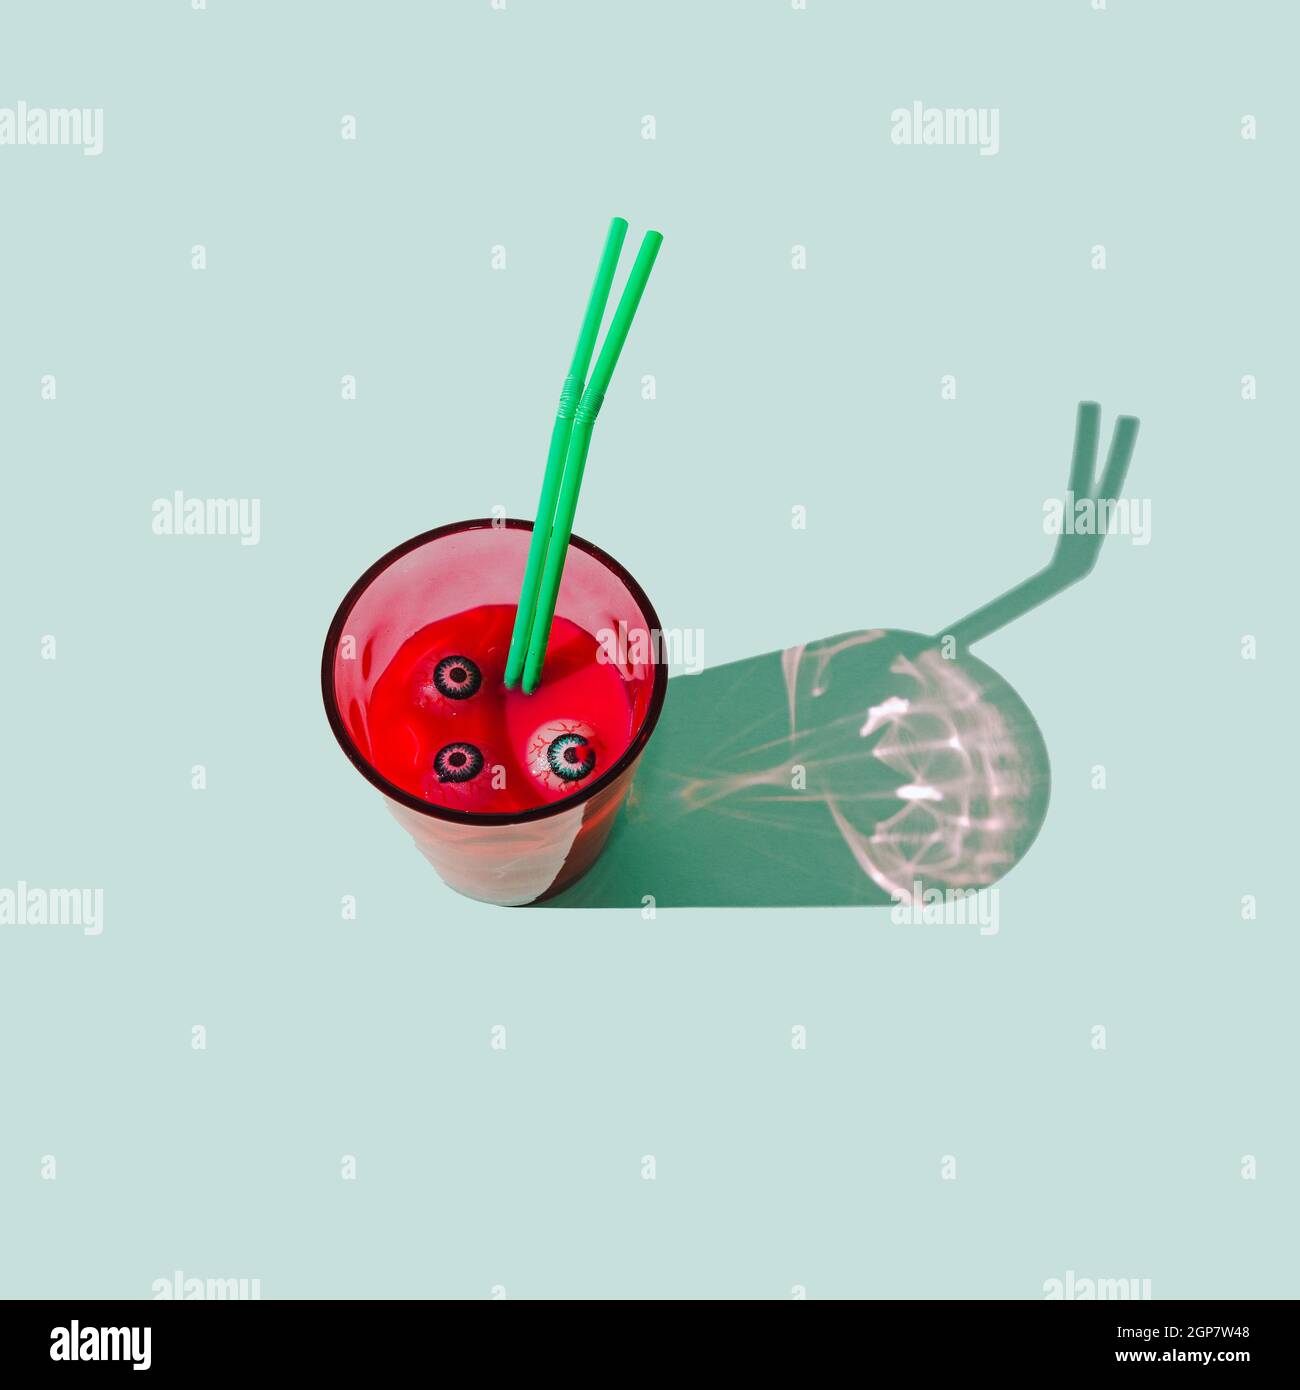 A glass filled with red drink, with eye balls in the liquid and two green straws. Pastel mint background. Spooky Halloween traditional celebration con Stock Photo